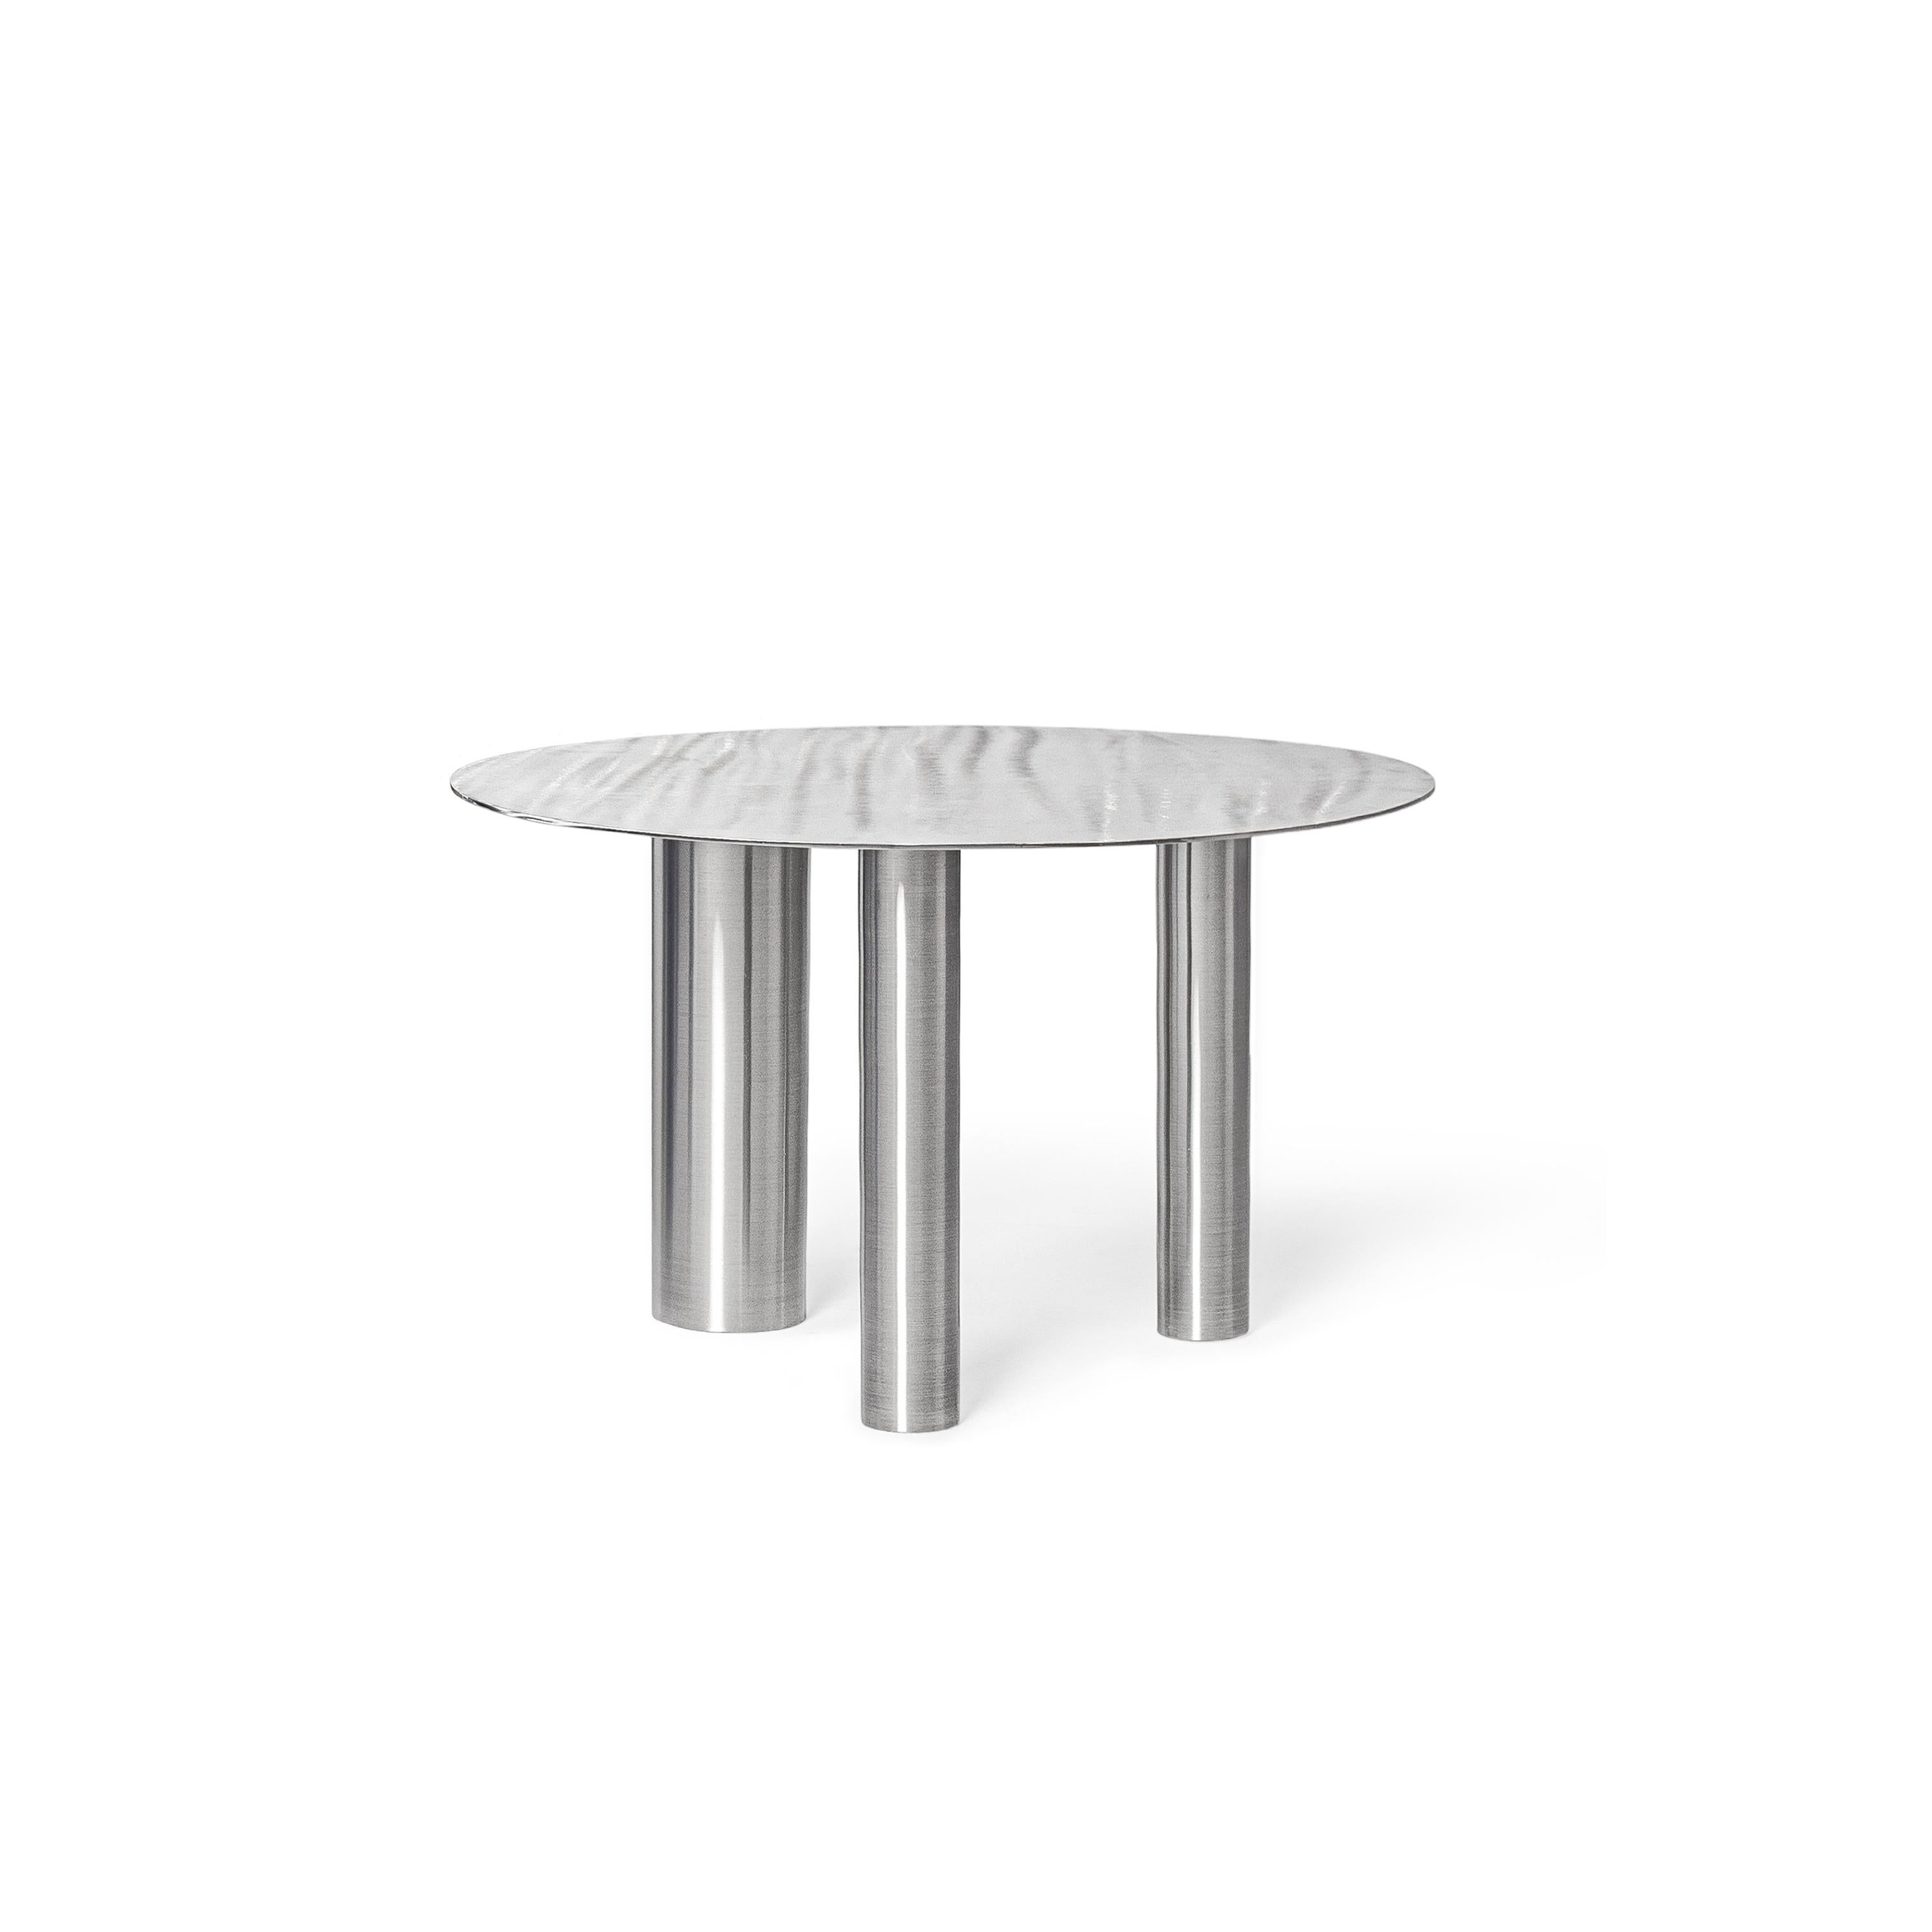 Set of Two Modern Coffee Tables Brandt CS1 made of Stainless Steel by NOOM 1